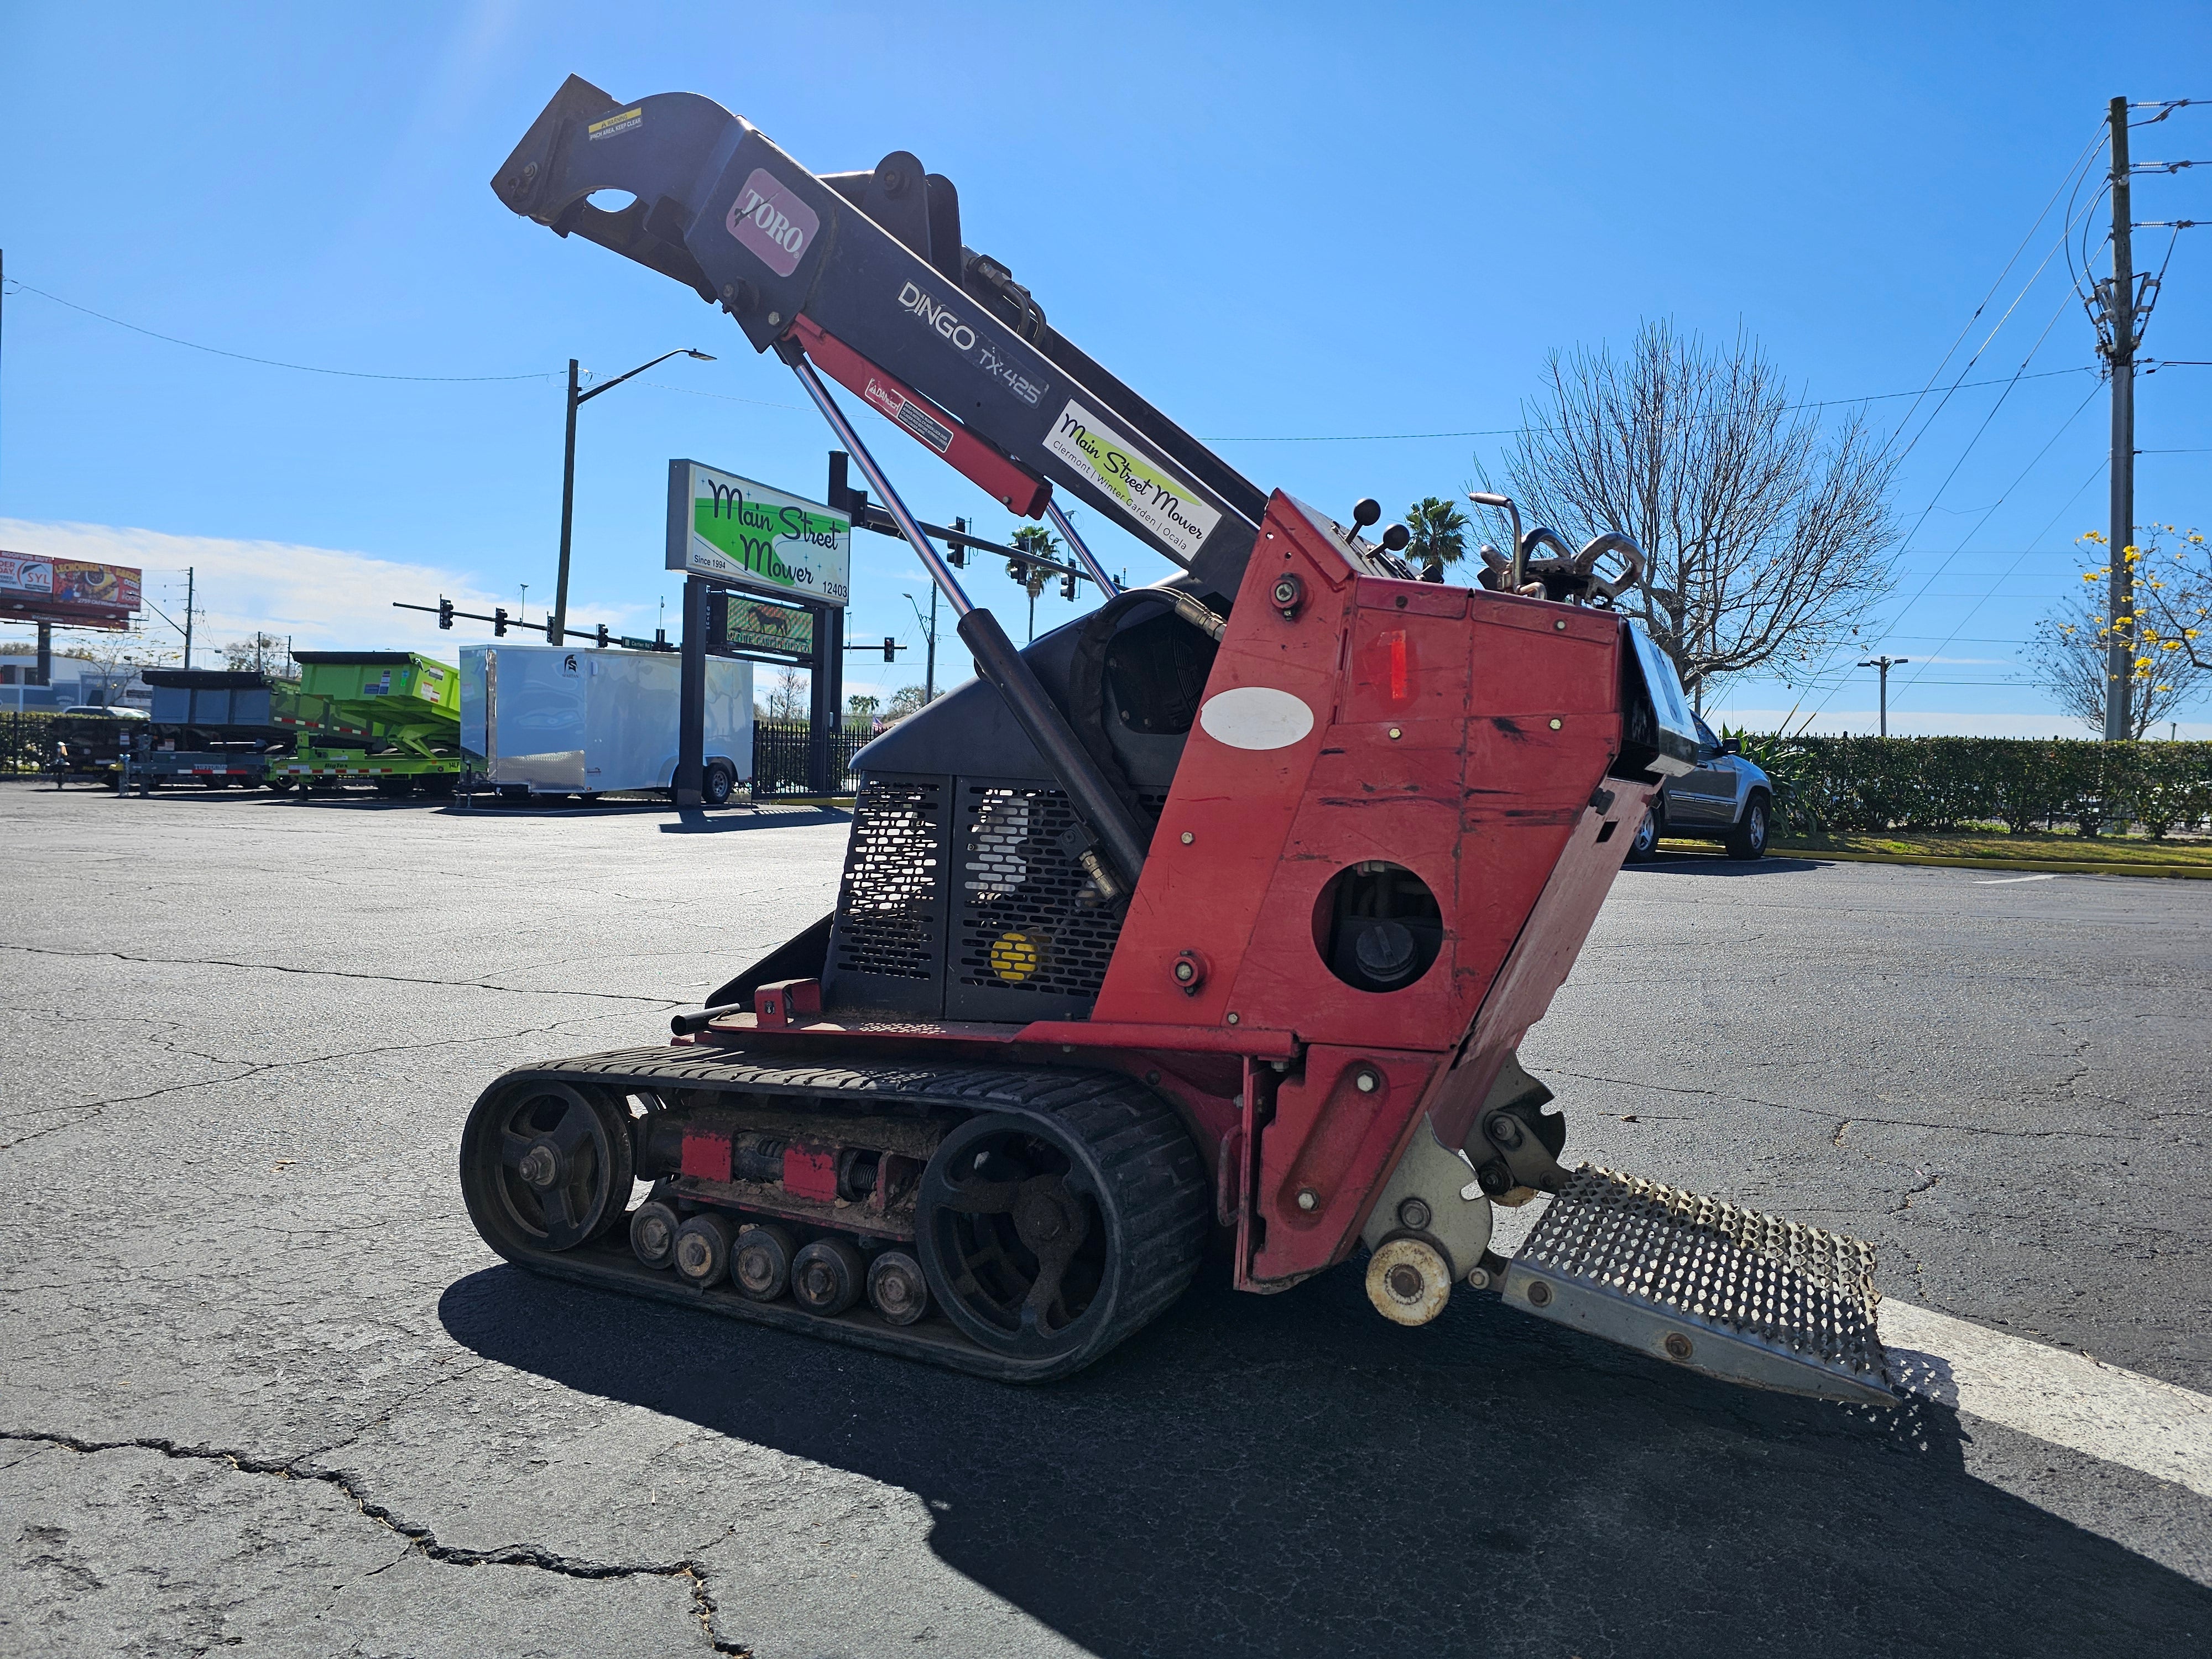 Toro Dingo TX 425 Wide Track Compact Utility Loader | USED